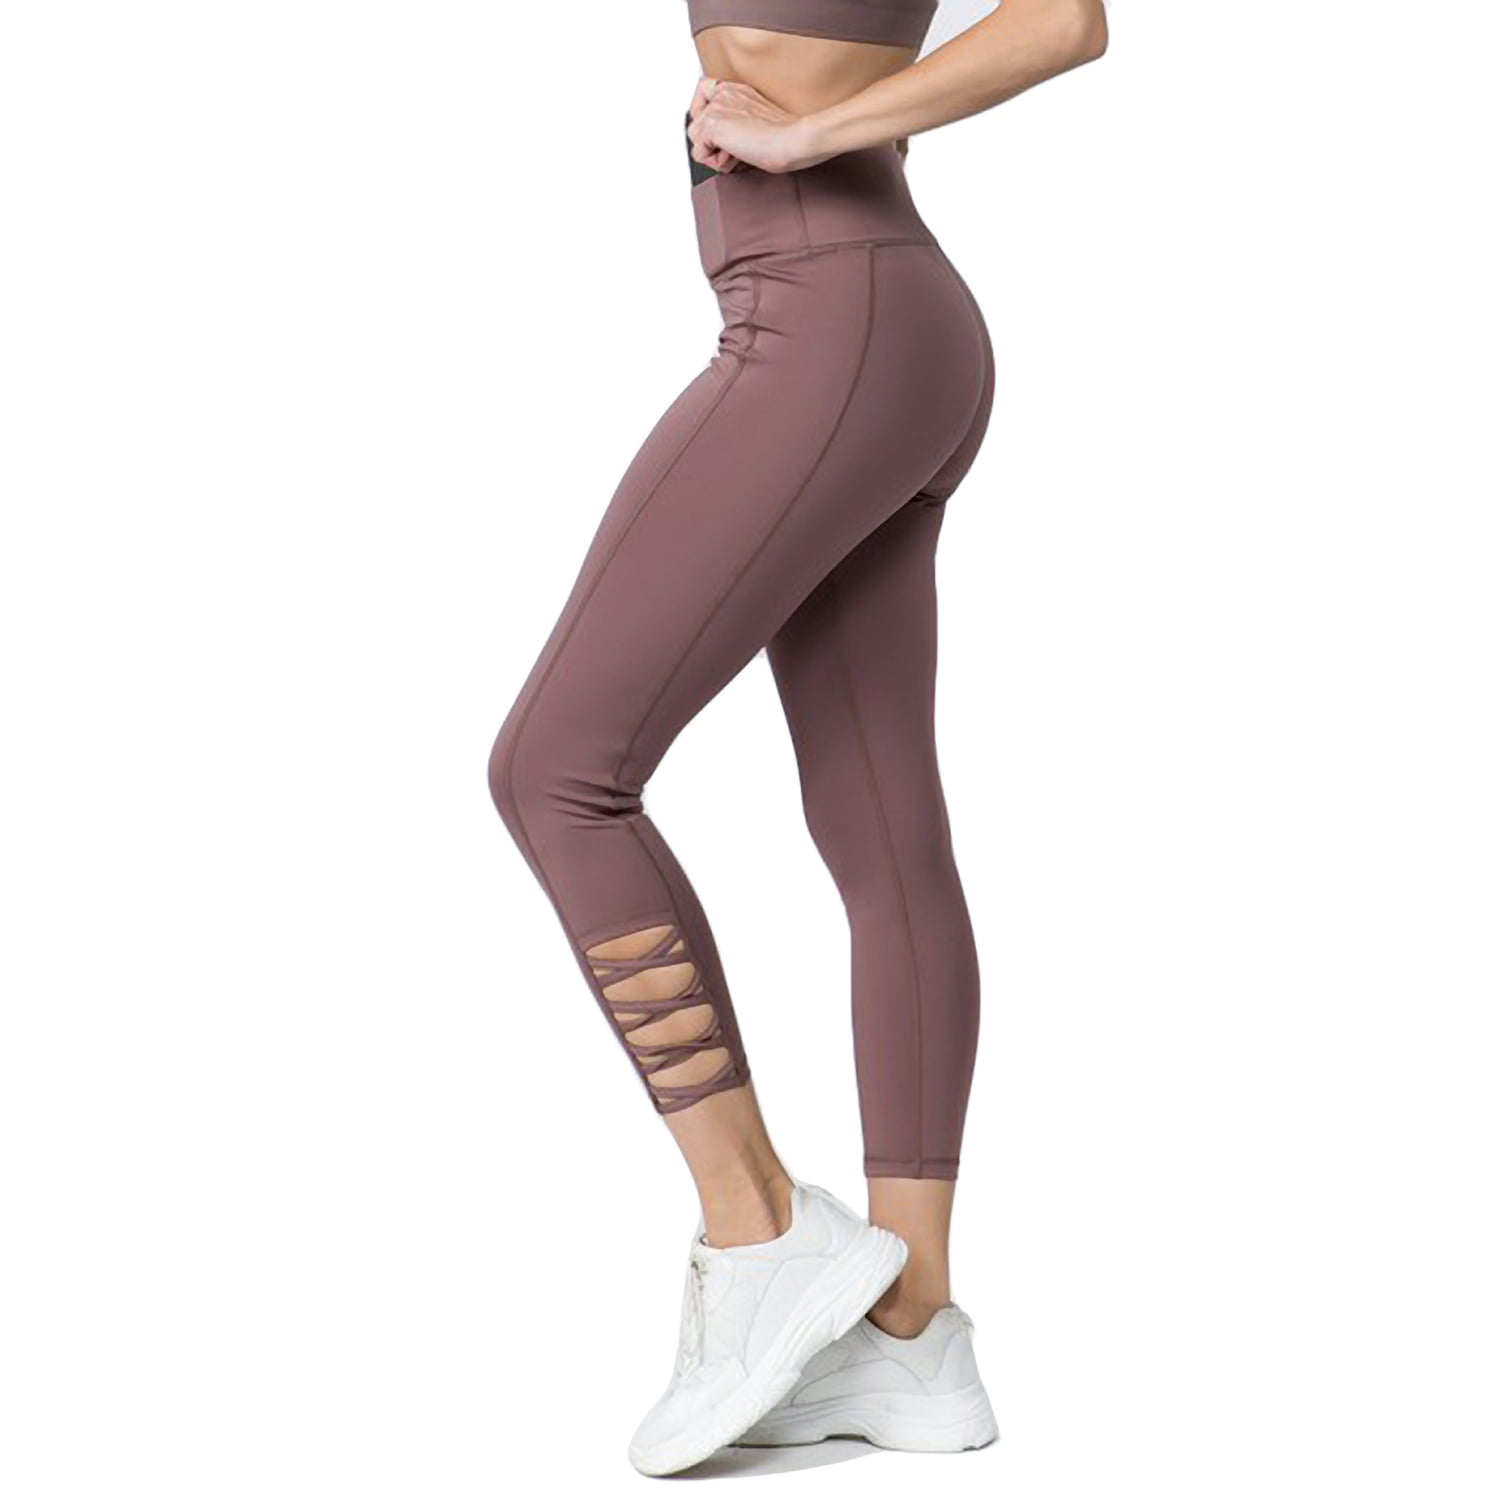 5 Day V cut workout leggings for Fat Body